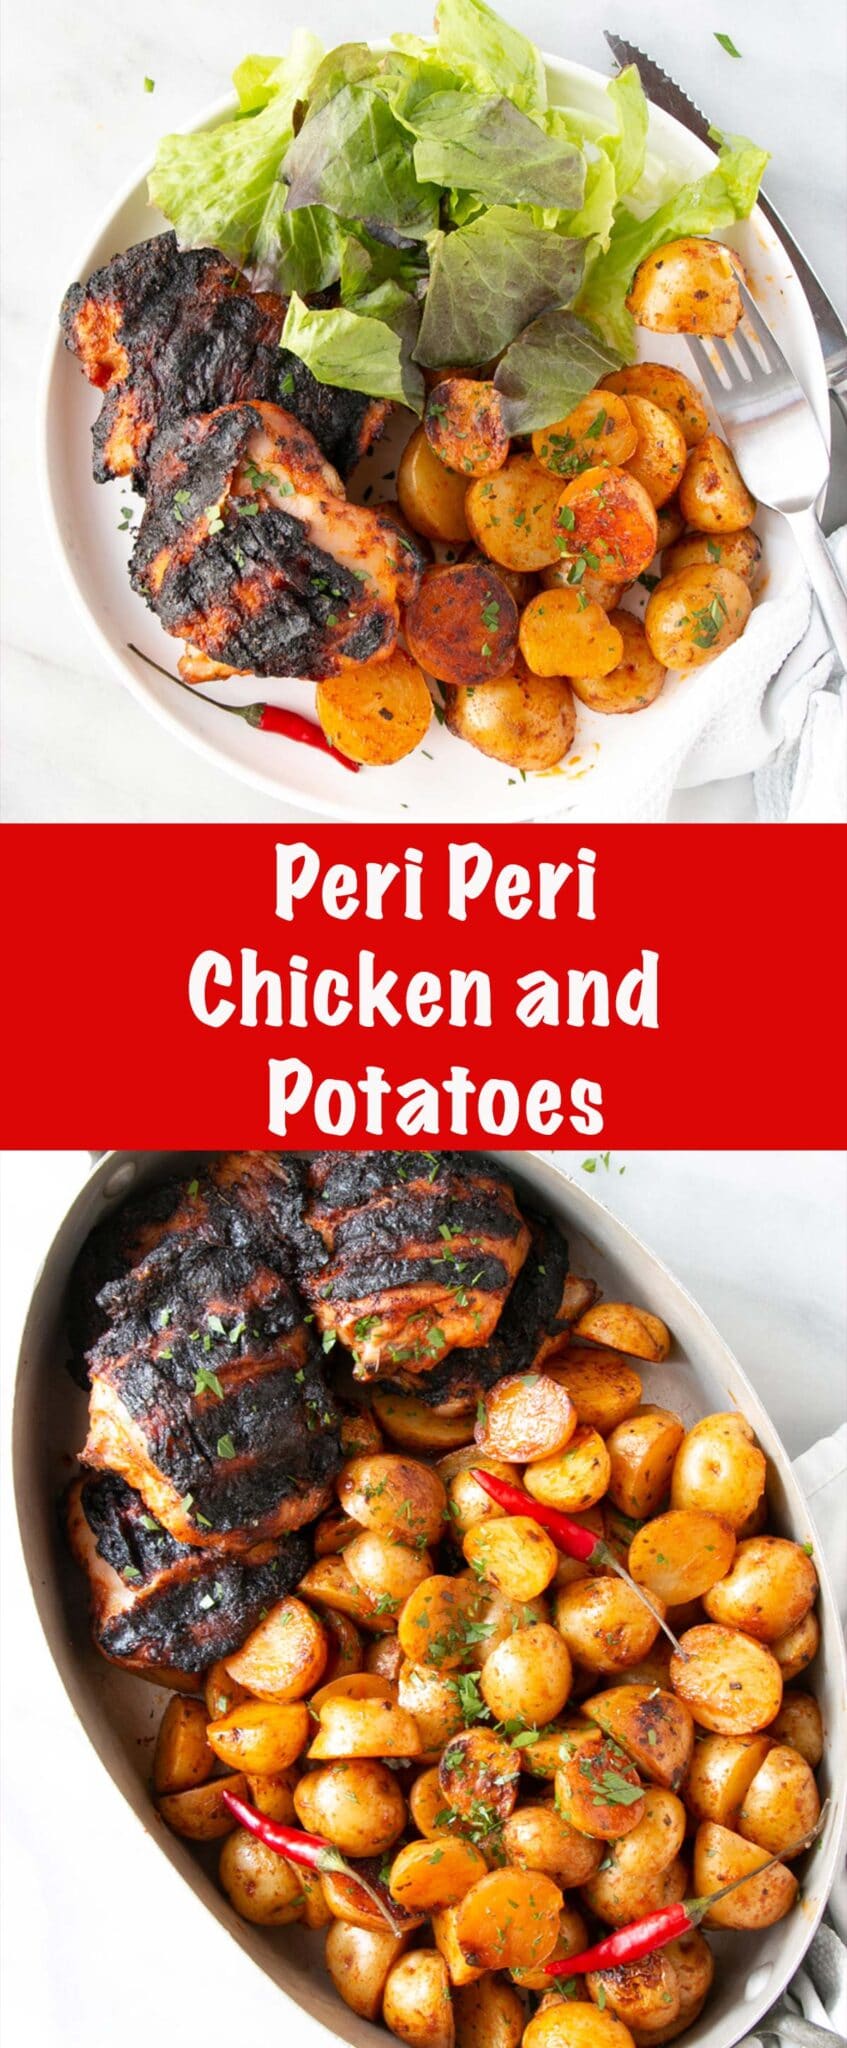 Juicy chicken and roasted potatoes that taste so DELISH! Smokey, yet balanced Peri Peri marinade take this easy grilling recipe to another level. #ad #dinner @littlepotatoco via @mykitchenlove